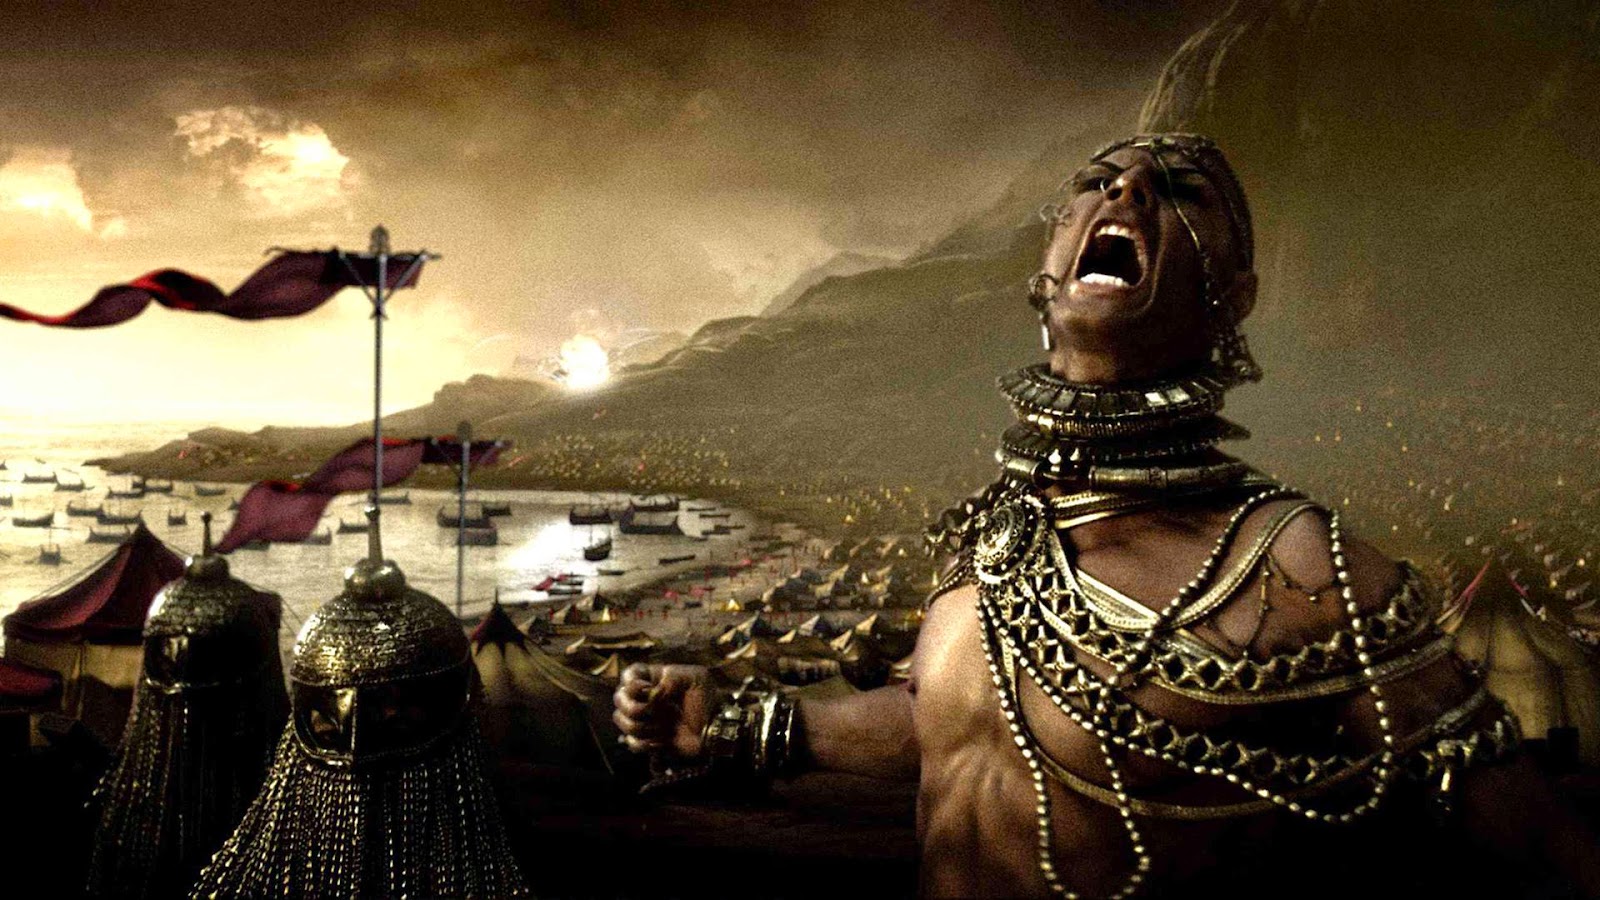 300: Rise of an Empire (2014) - Opinion as a Movie-freak